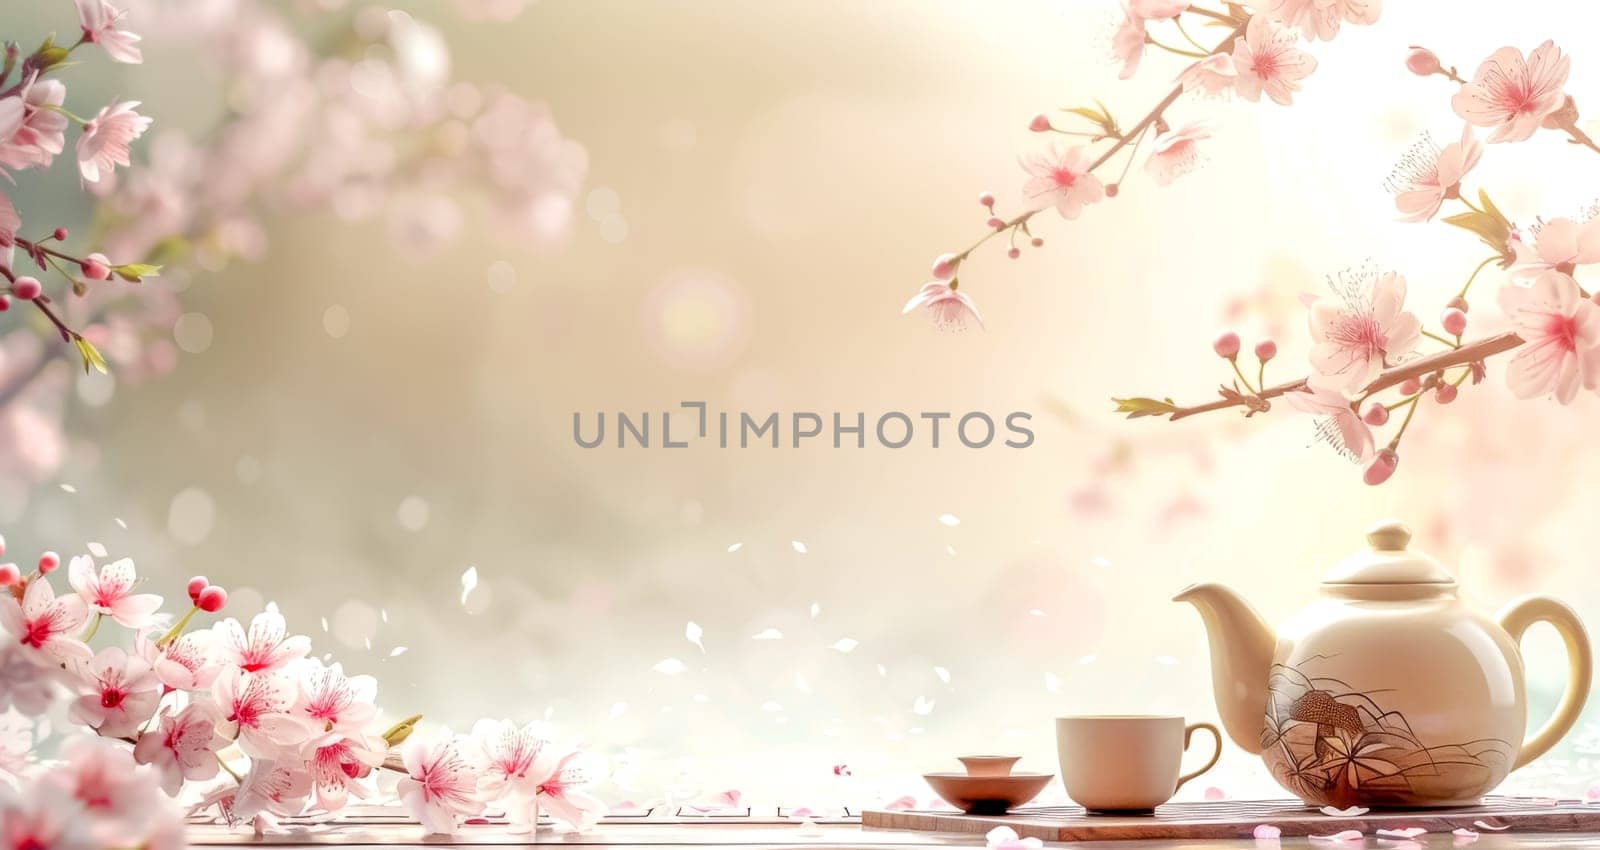 Tranquil tea time setup with cherry blossoms in a soft, glowing light